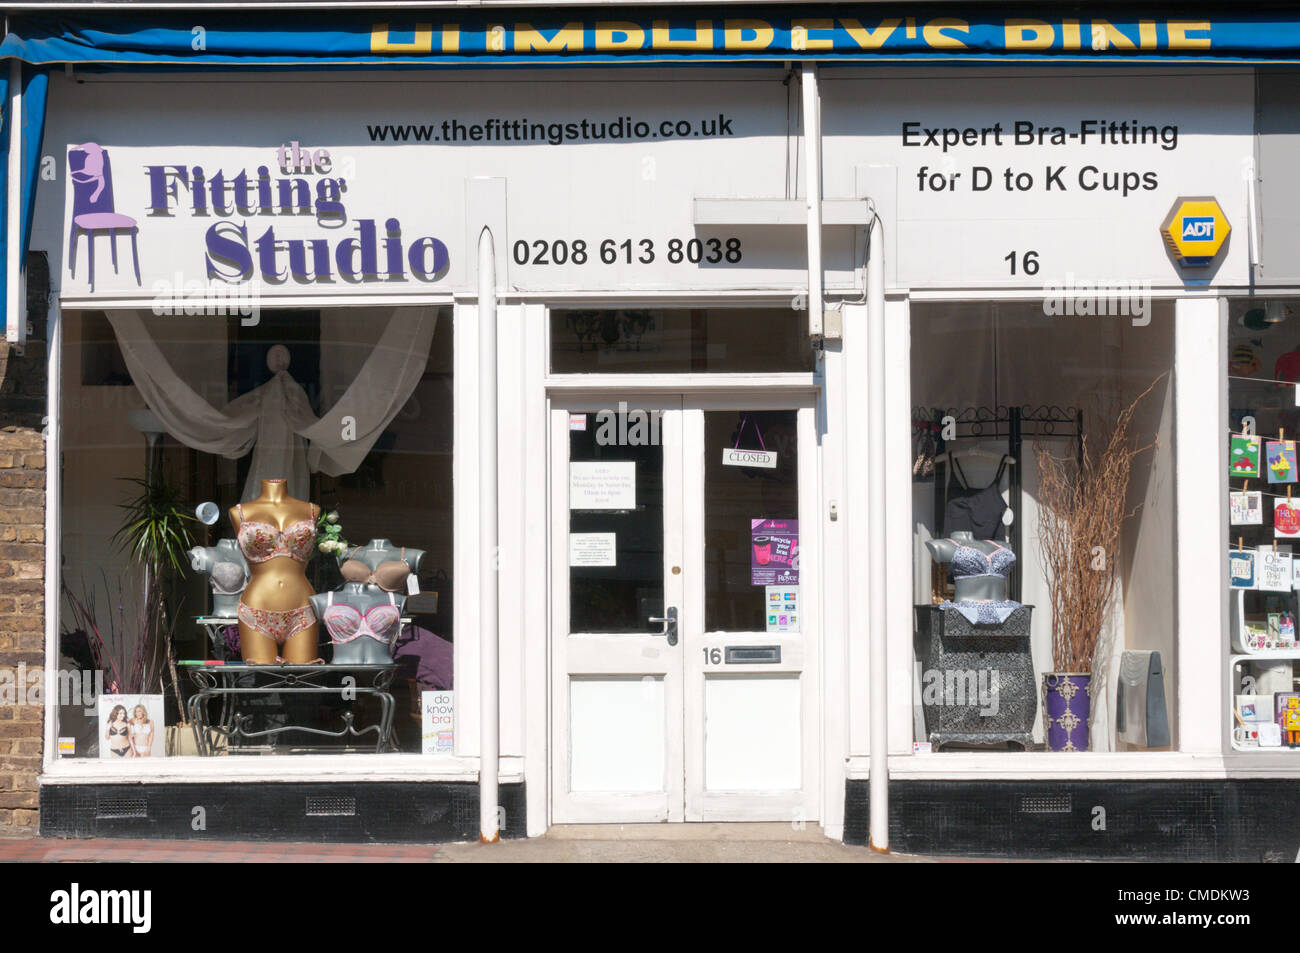 Our Fitting Studio in Stokesley, Bra Fitting Services